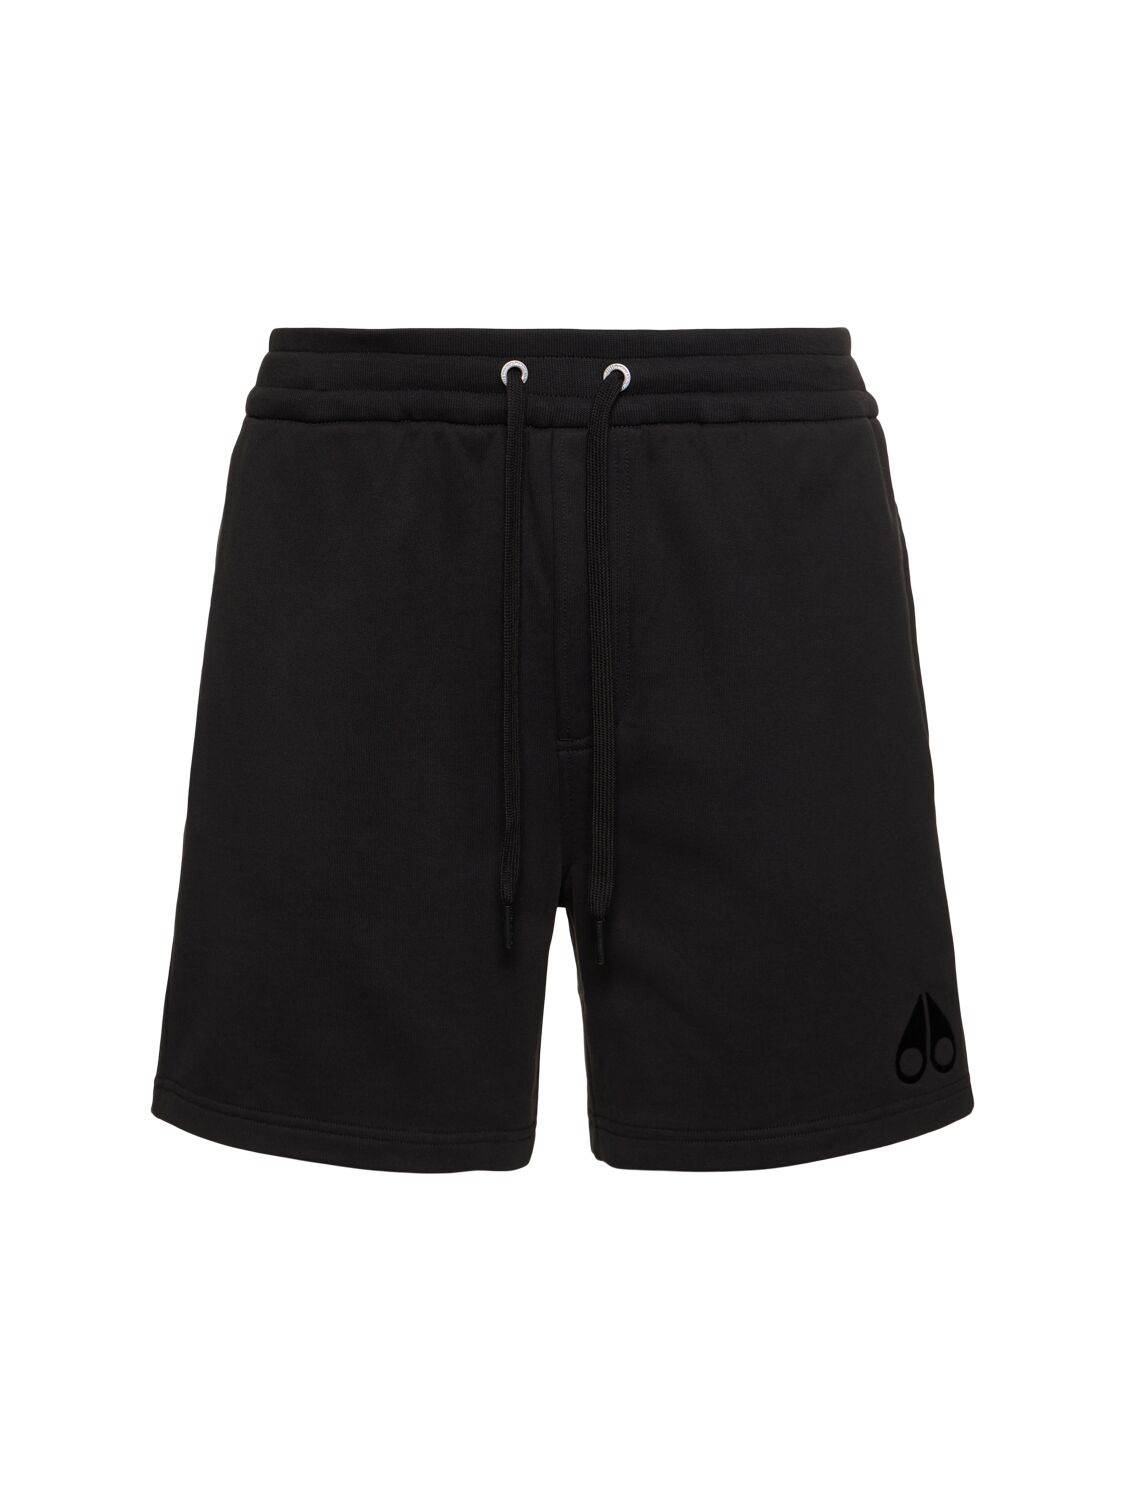 Moose Knuckles Clyde Cotton Shorts In Black 292